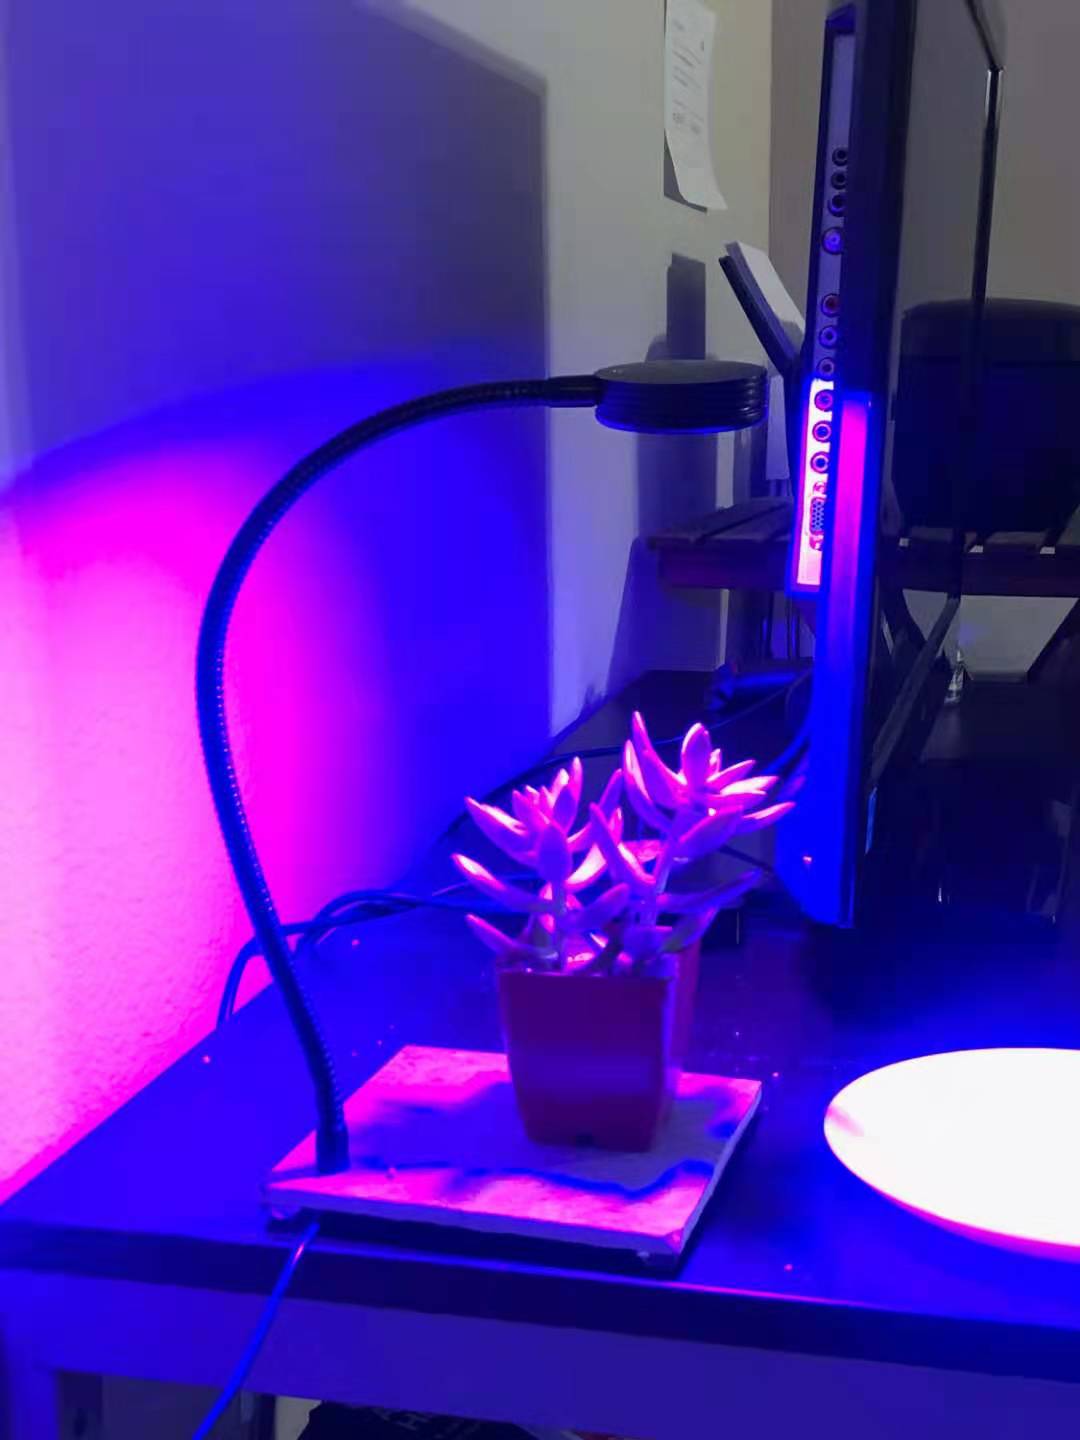 The grow lamp shining on a succulent